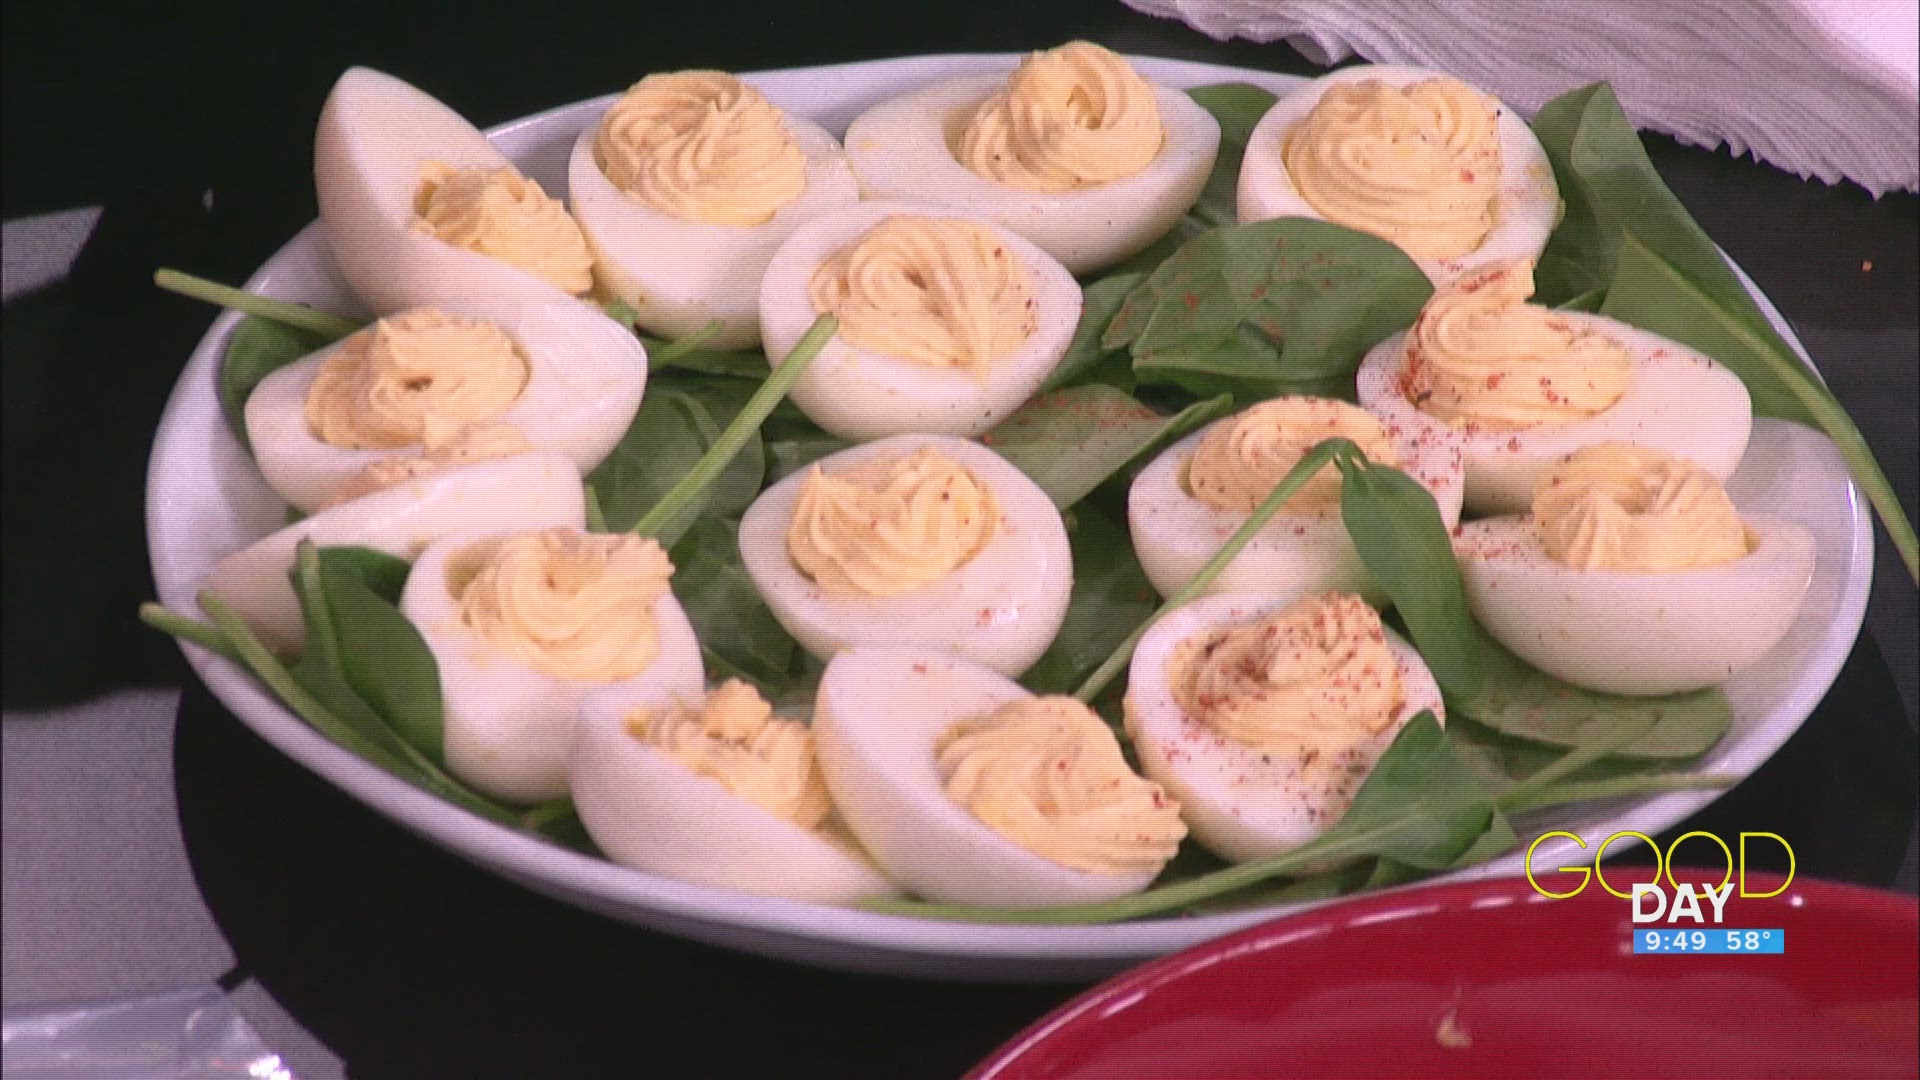 Chef Ella Dudek whips up some fabulous brunch to have during Mother's Day.